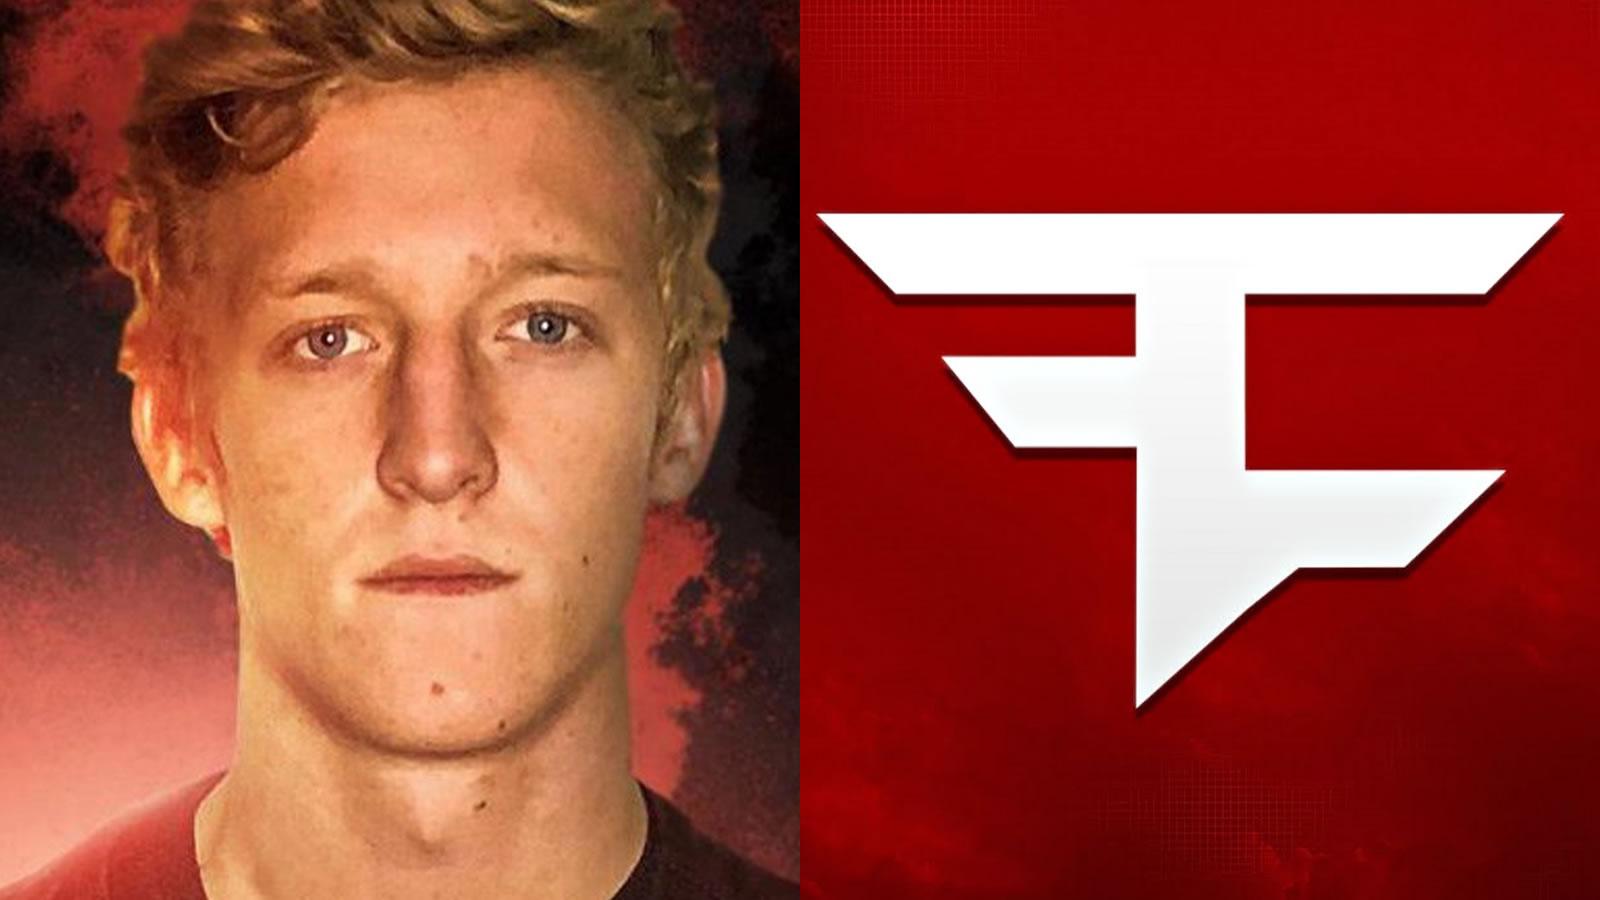 Breaking down the FaZe and Tfue Contract Drama